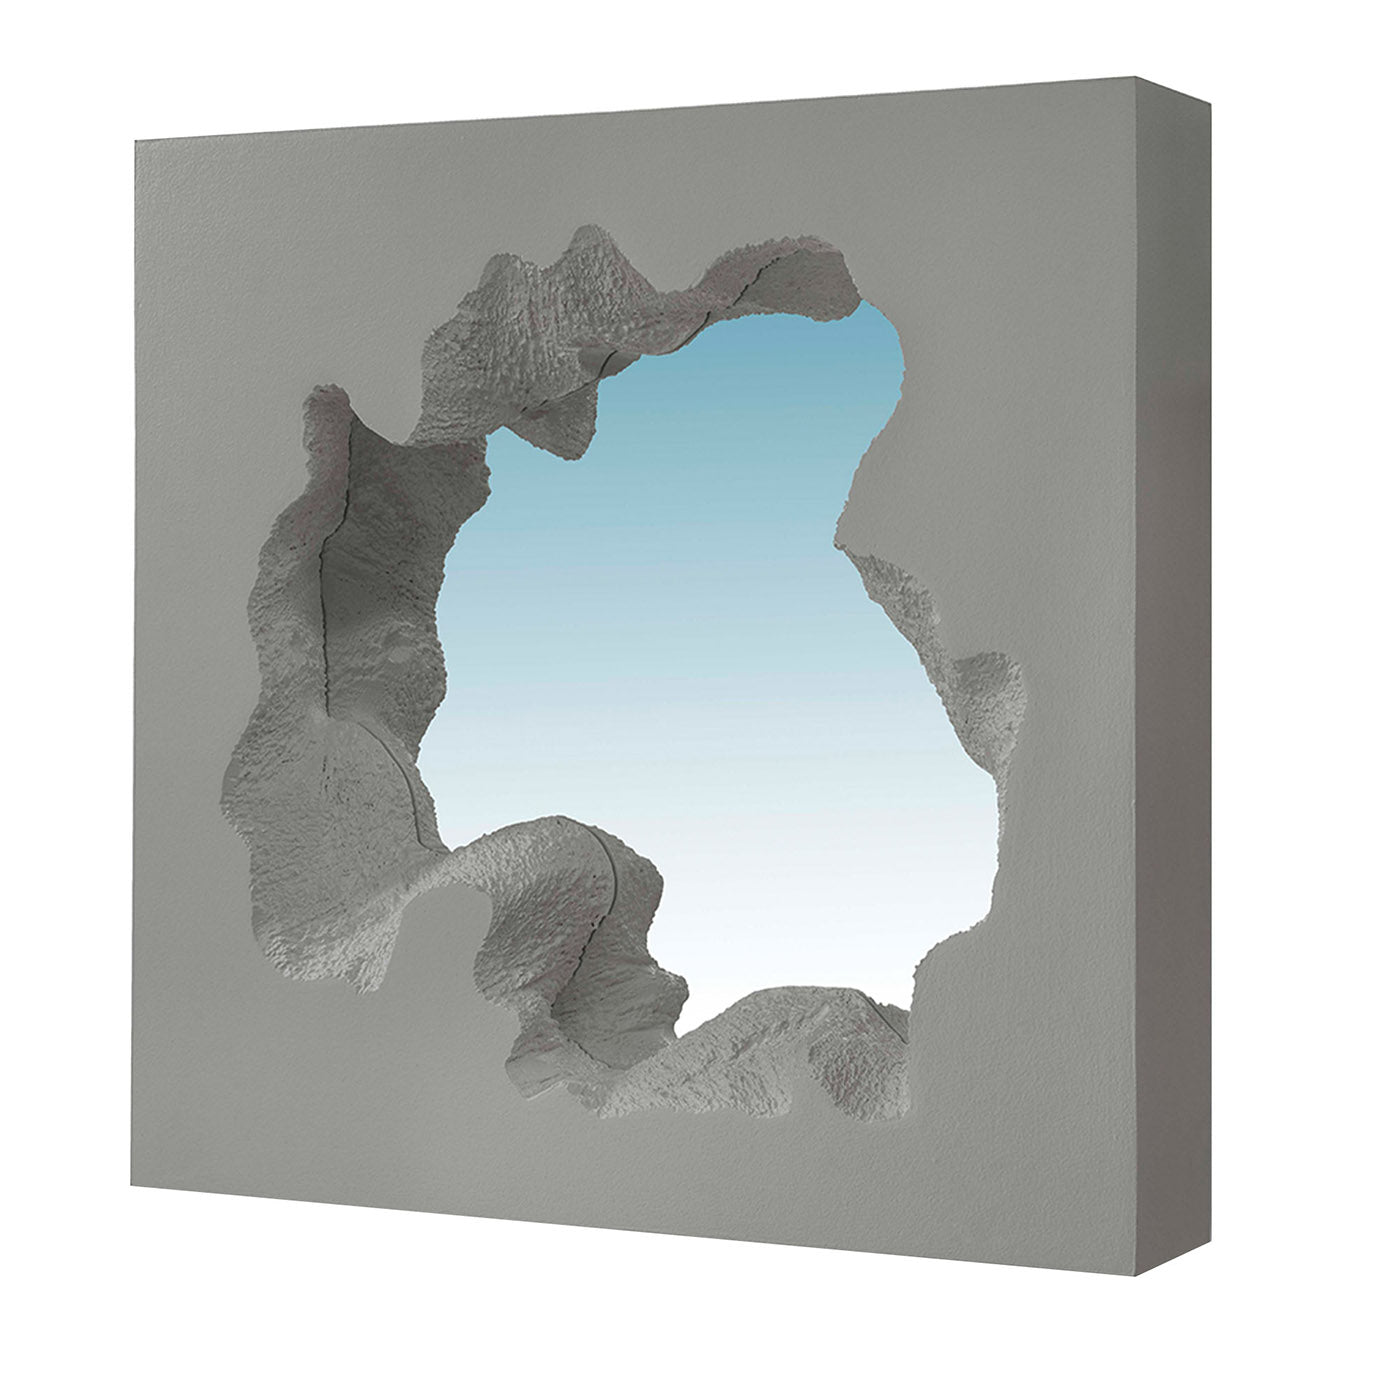 Broken Limited Edition Square Mirror by Snarkitecture